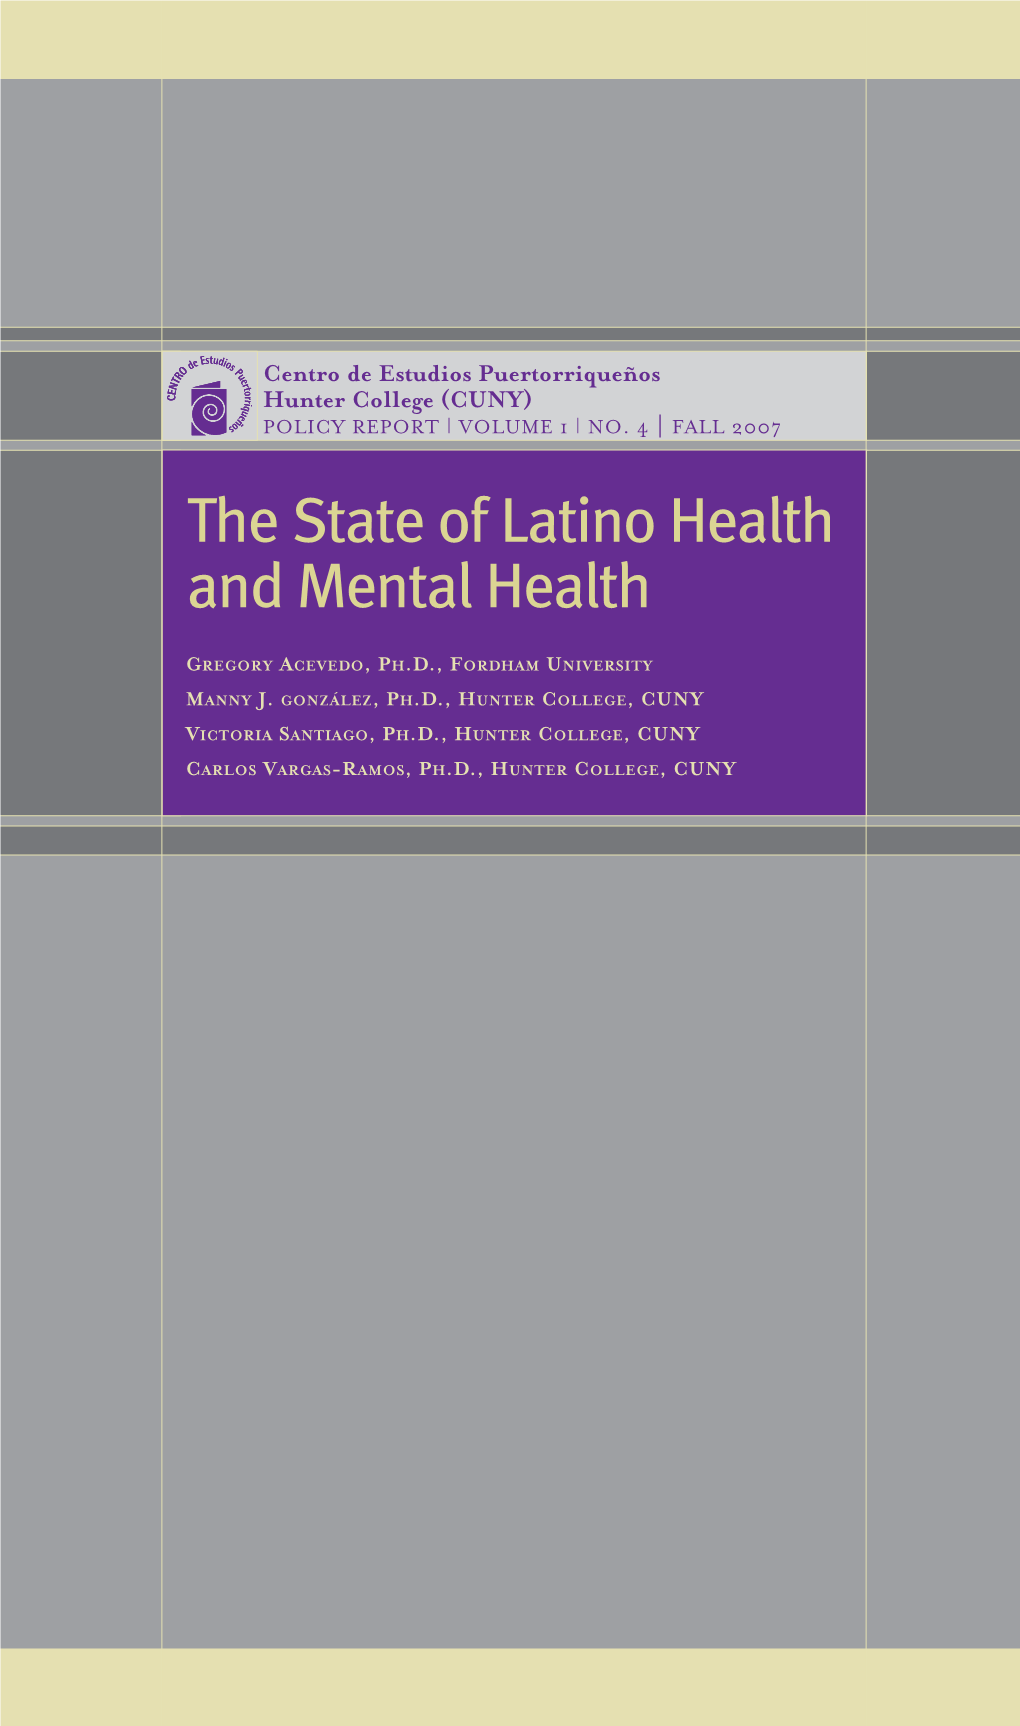 The State of Latino Health and Mental Health